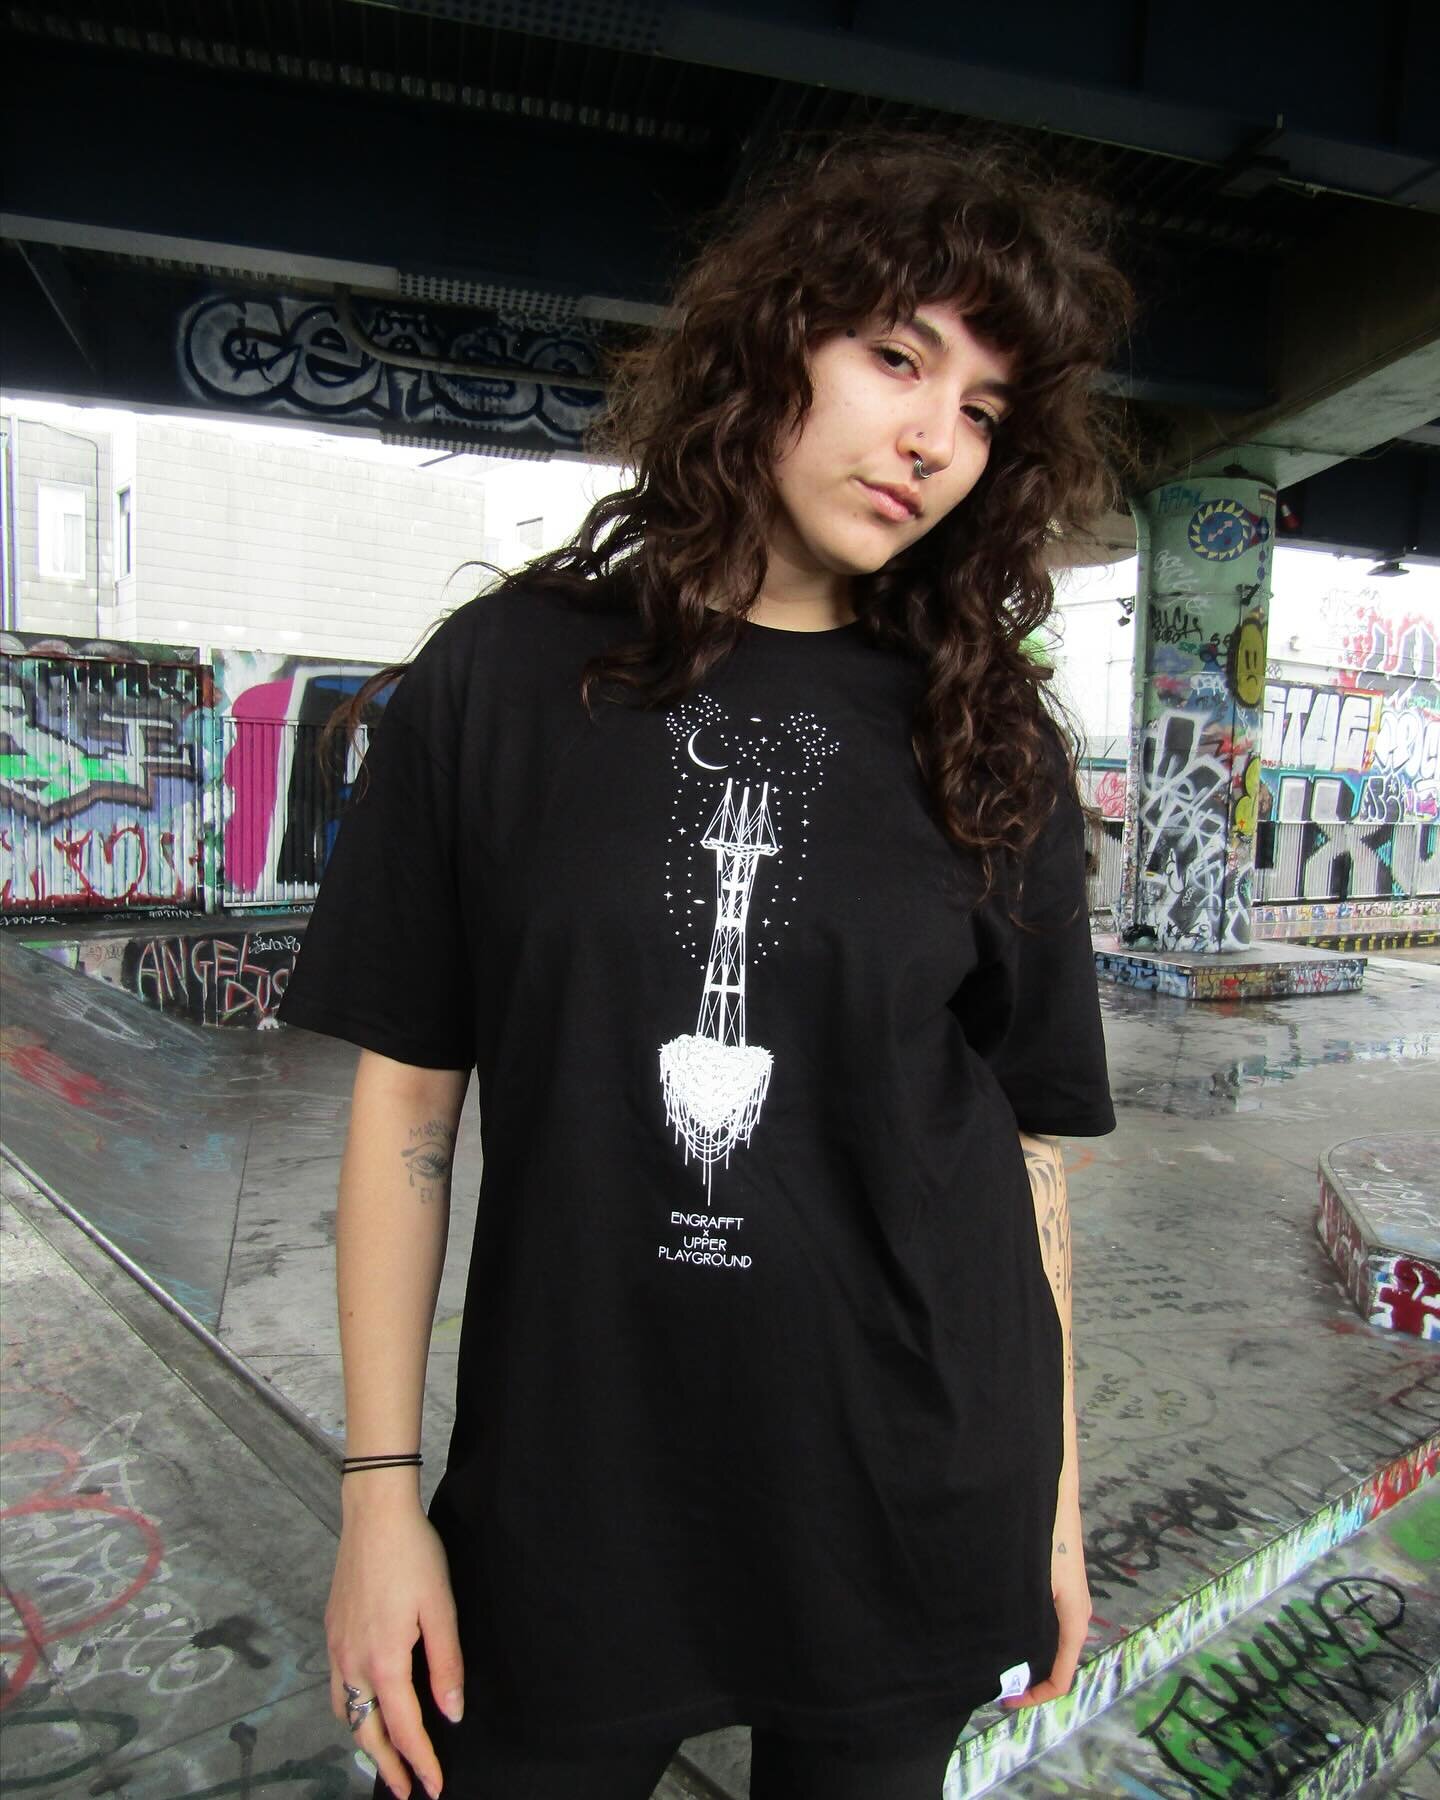 X @UpperPlayground collab has taken flight! Included in the collection is the Skyward Sutro Tee, which features a unique take on one of The City&rsquo;s most distinct landmarks, Sutro Tower. With original artwork and hand screen-printing by yours tru